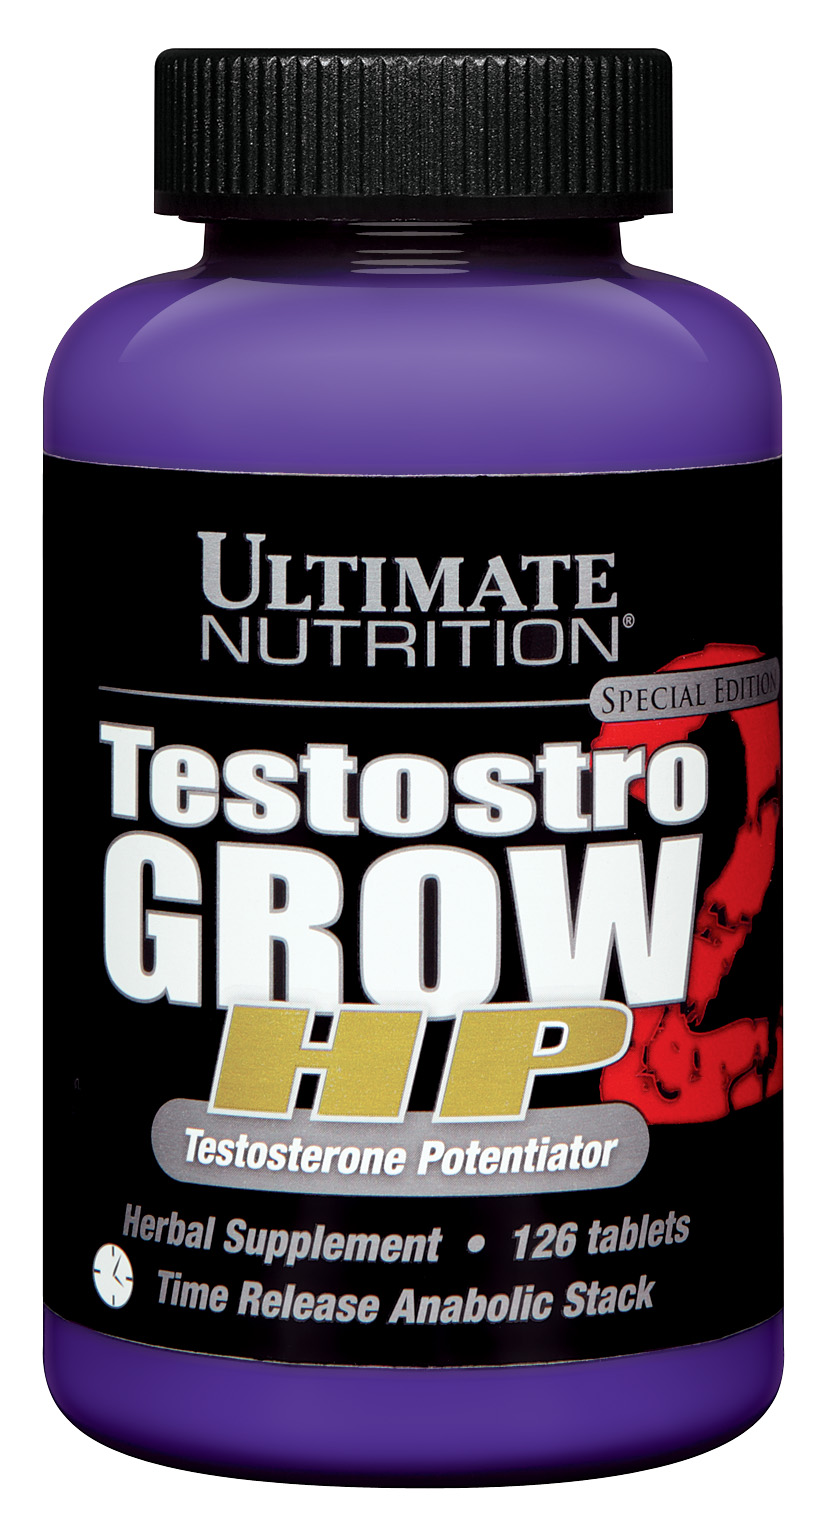 IM0516_FEAT_Supp_TestBooster_UltimateNutrition